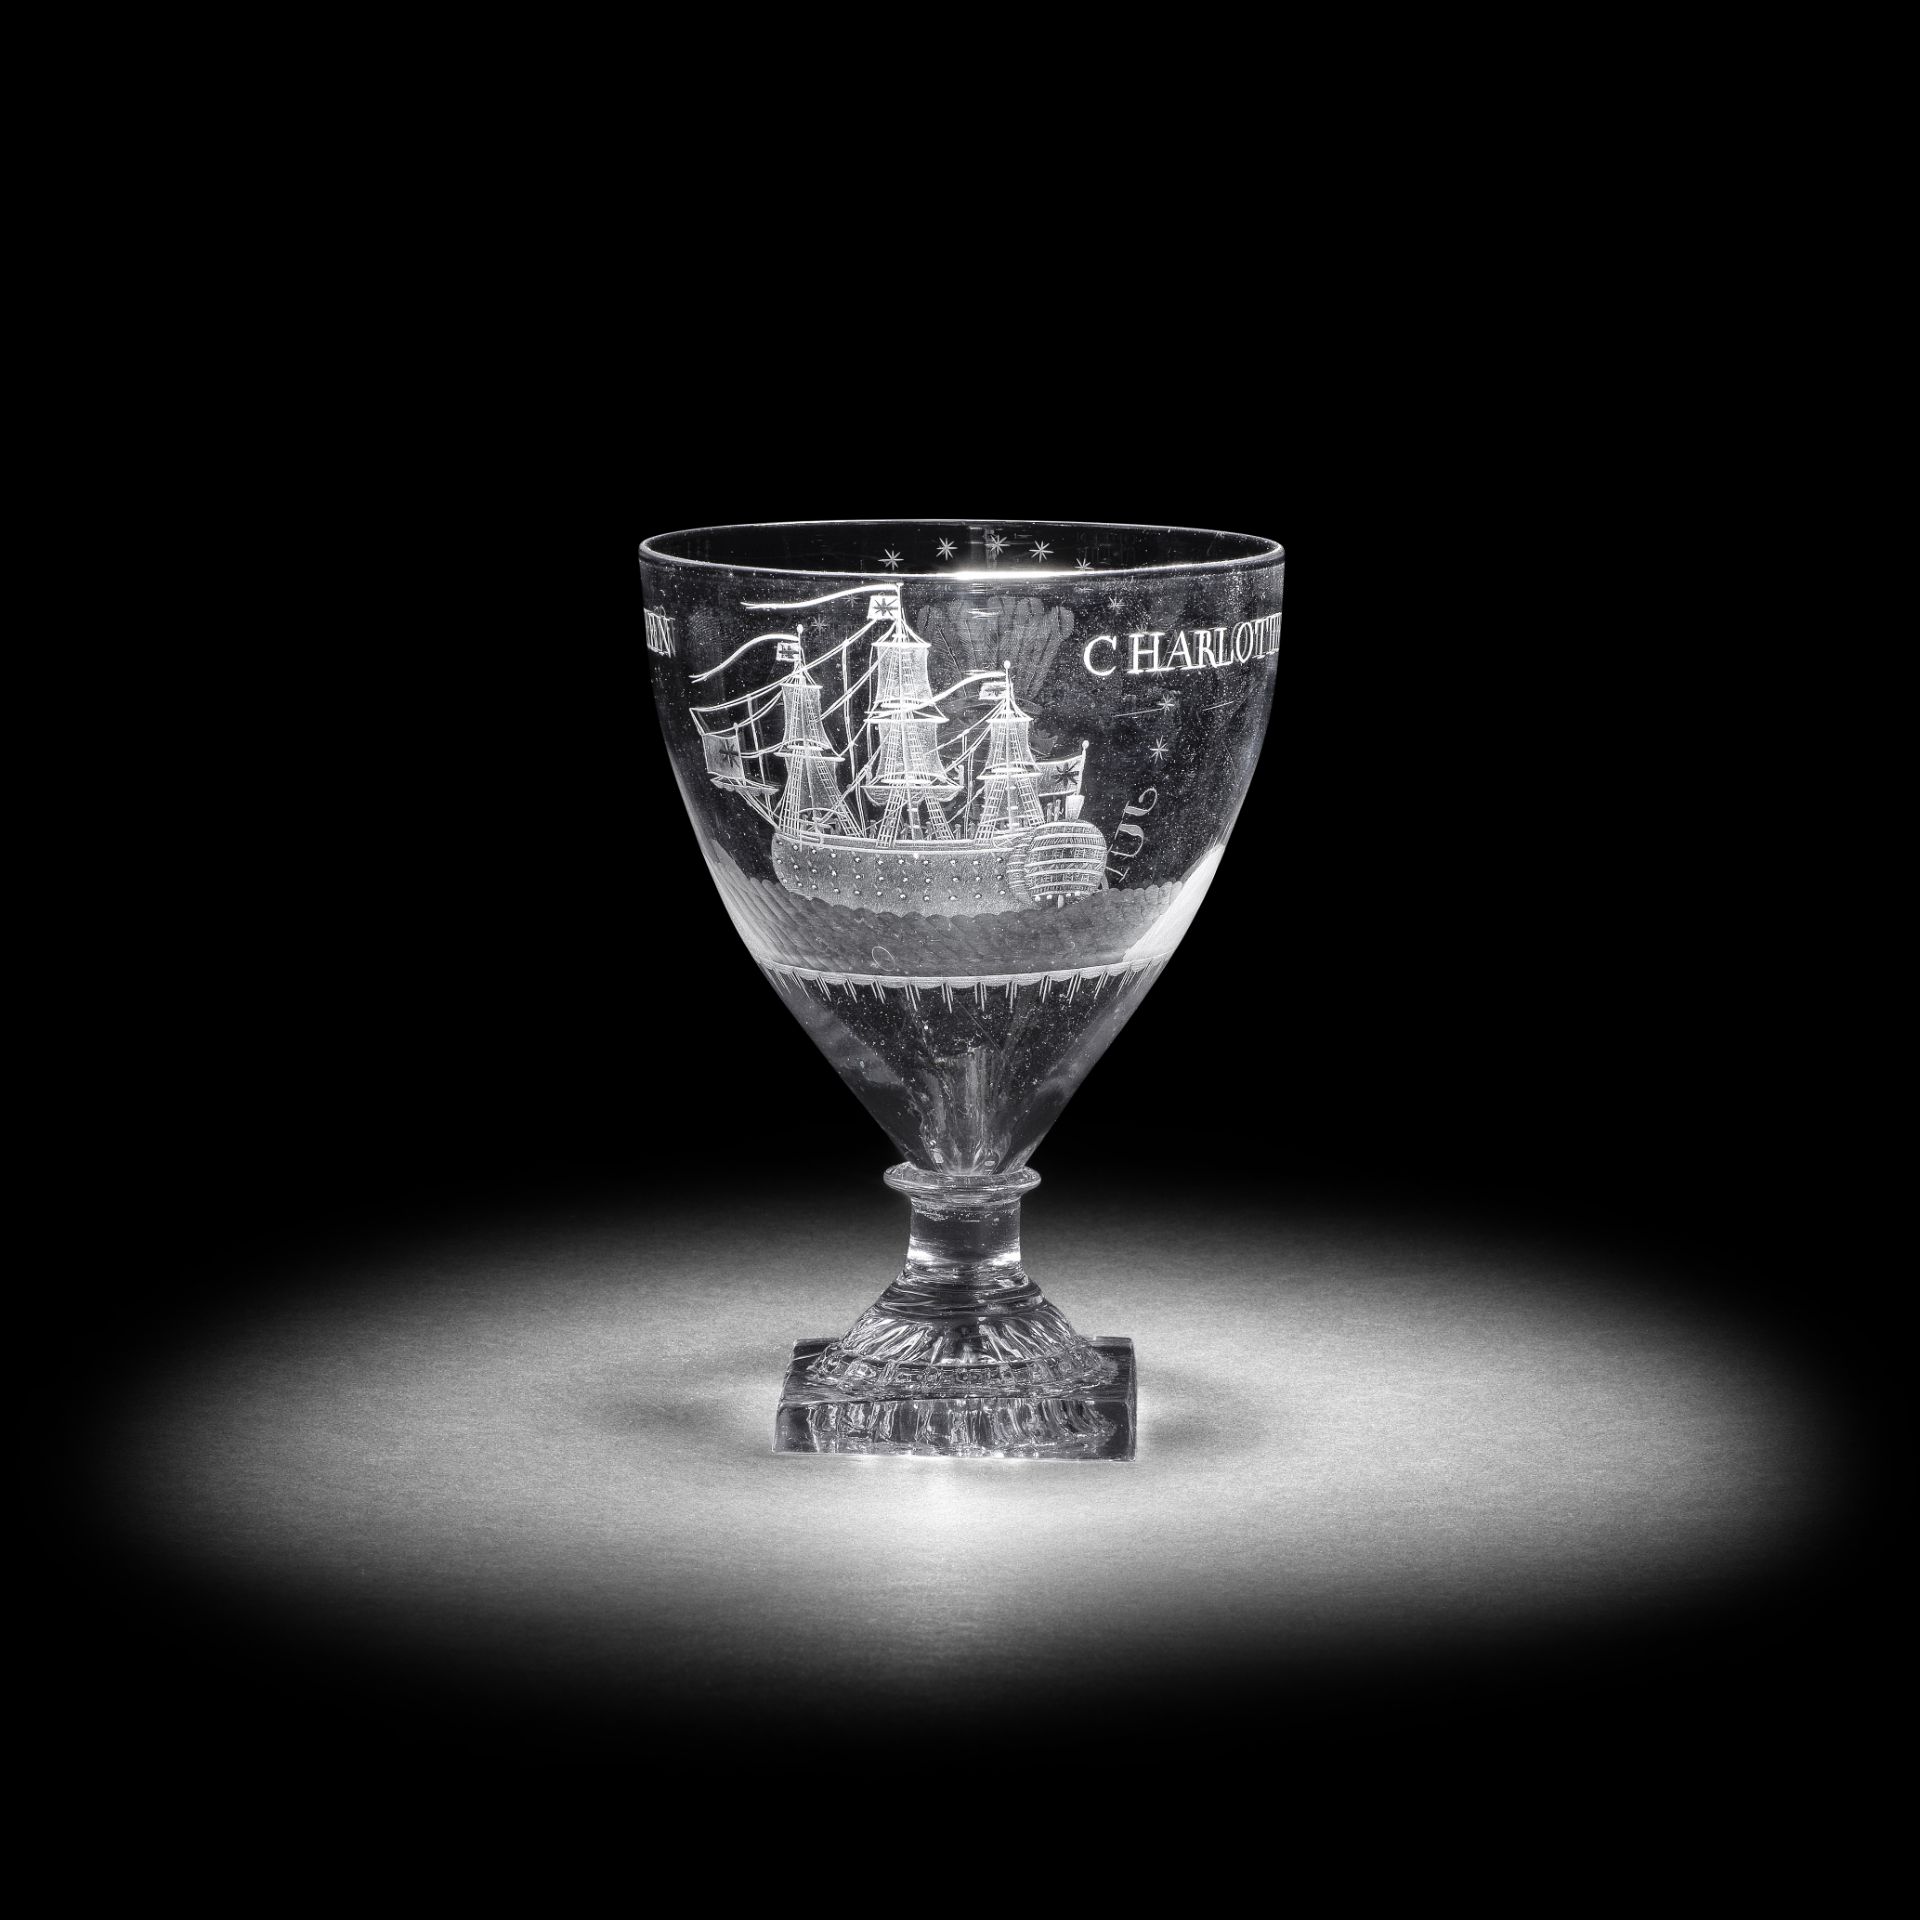 An engraved Admiral Lord Howe commemorative rummer, circa 1795-1800